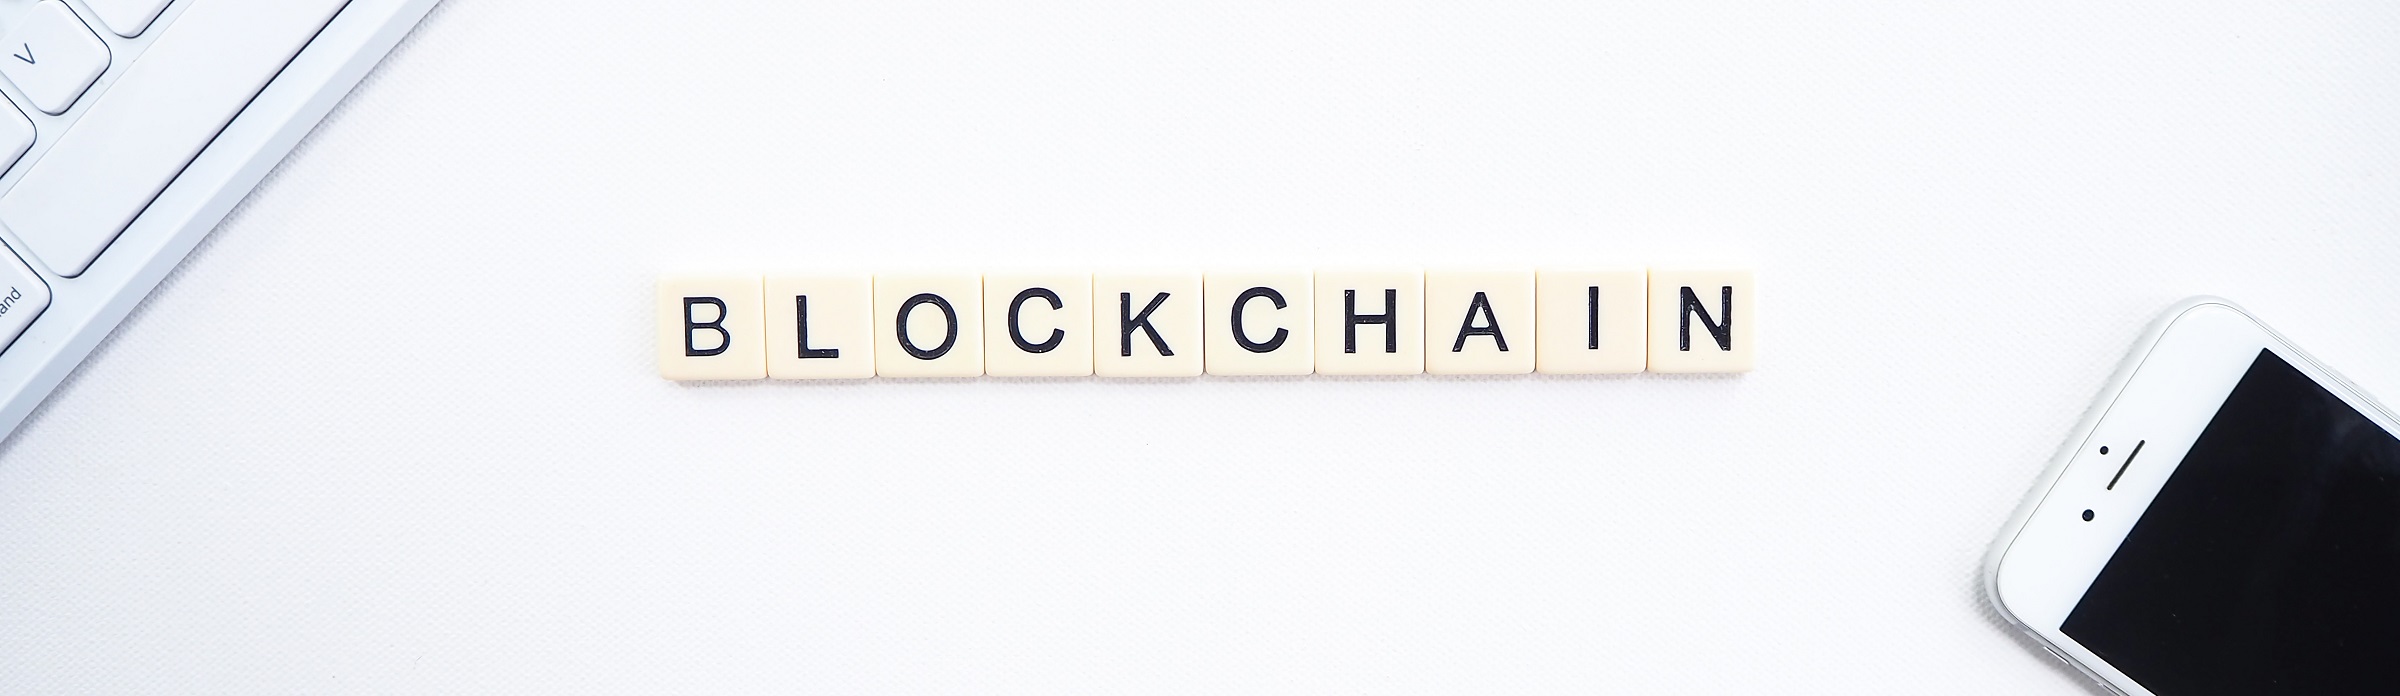 The Benefits of Using Blockchain Technology for Business